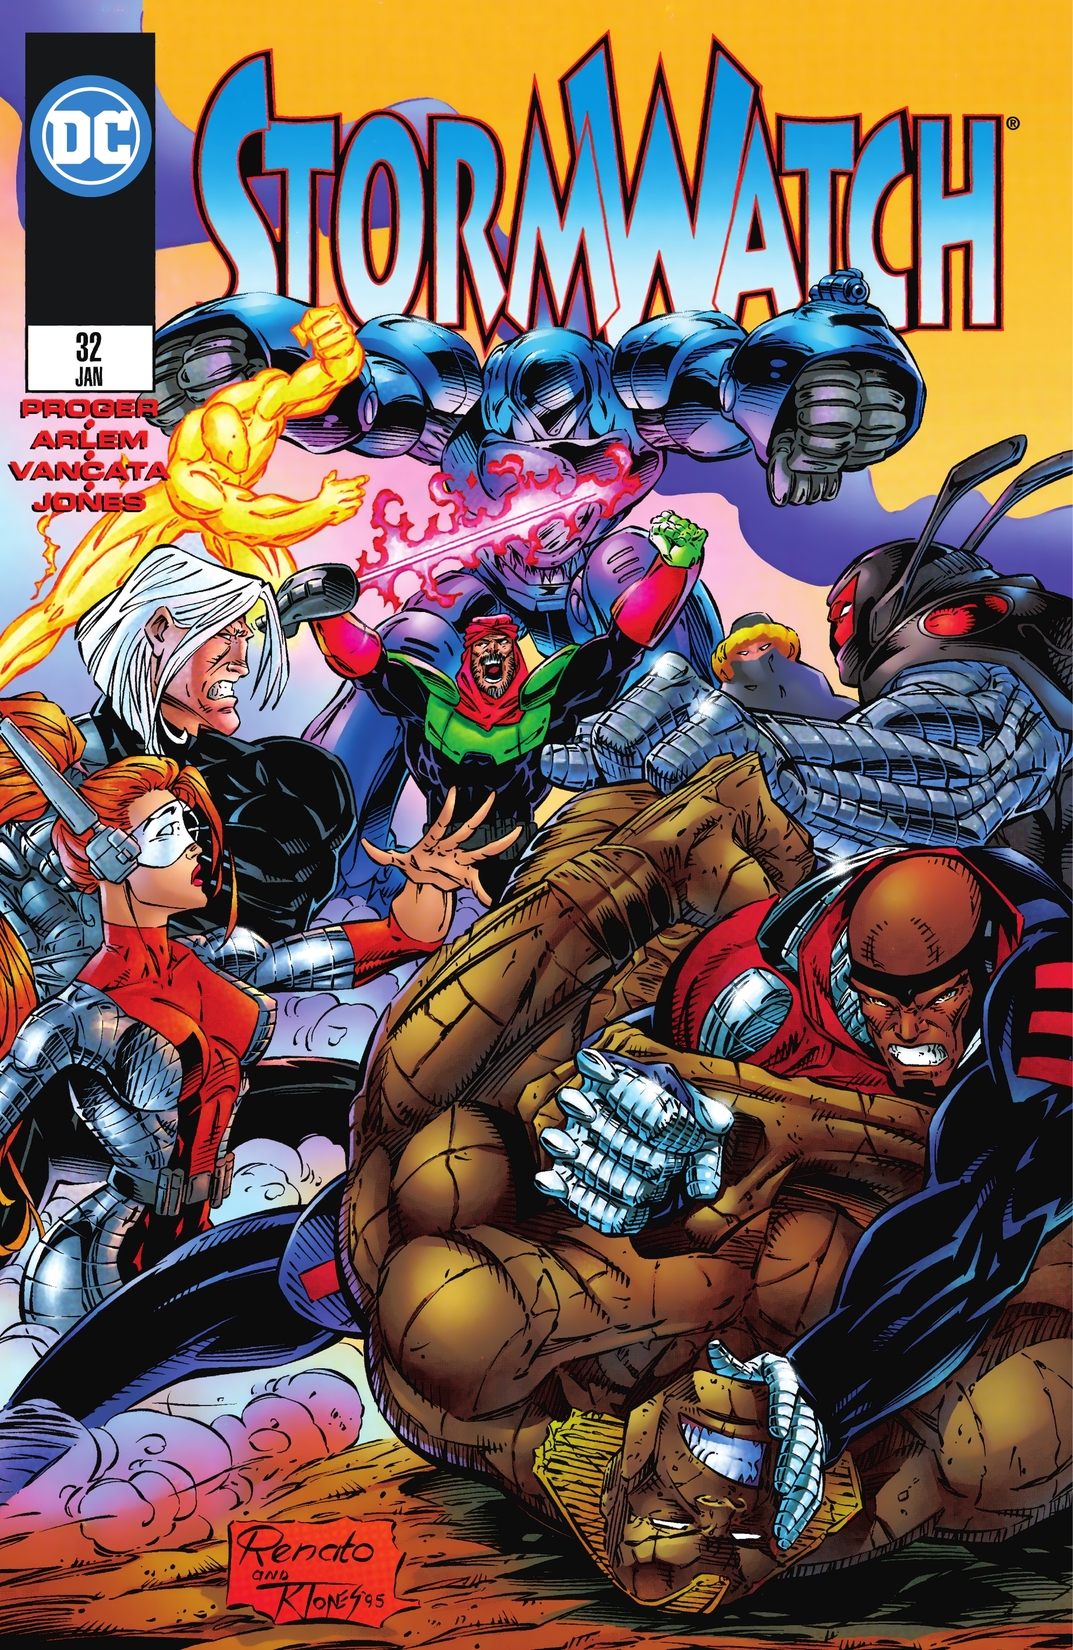 Stormwatch (1993-1997) #32 preview images